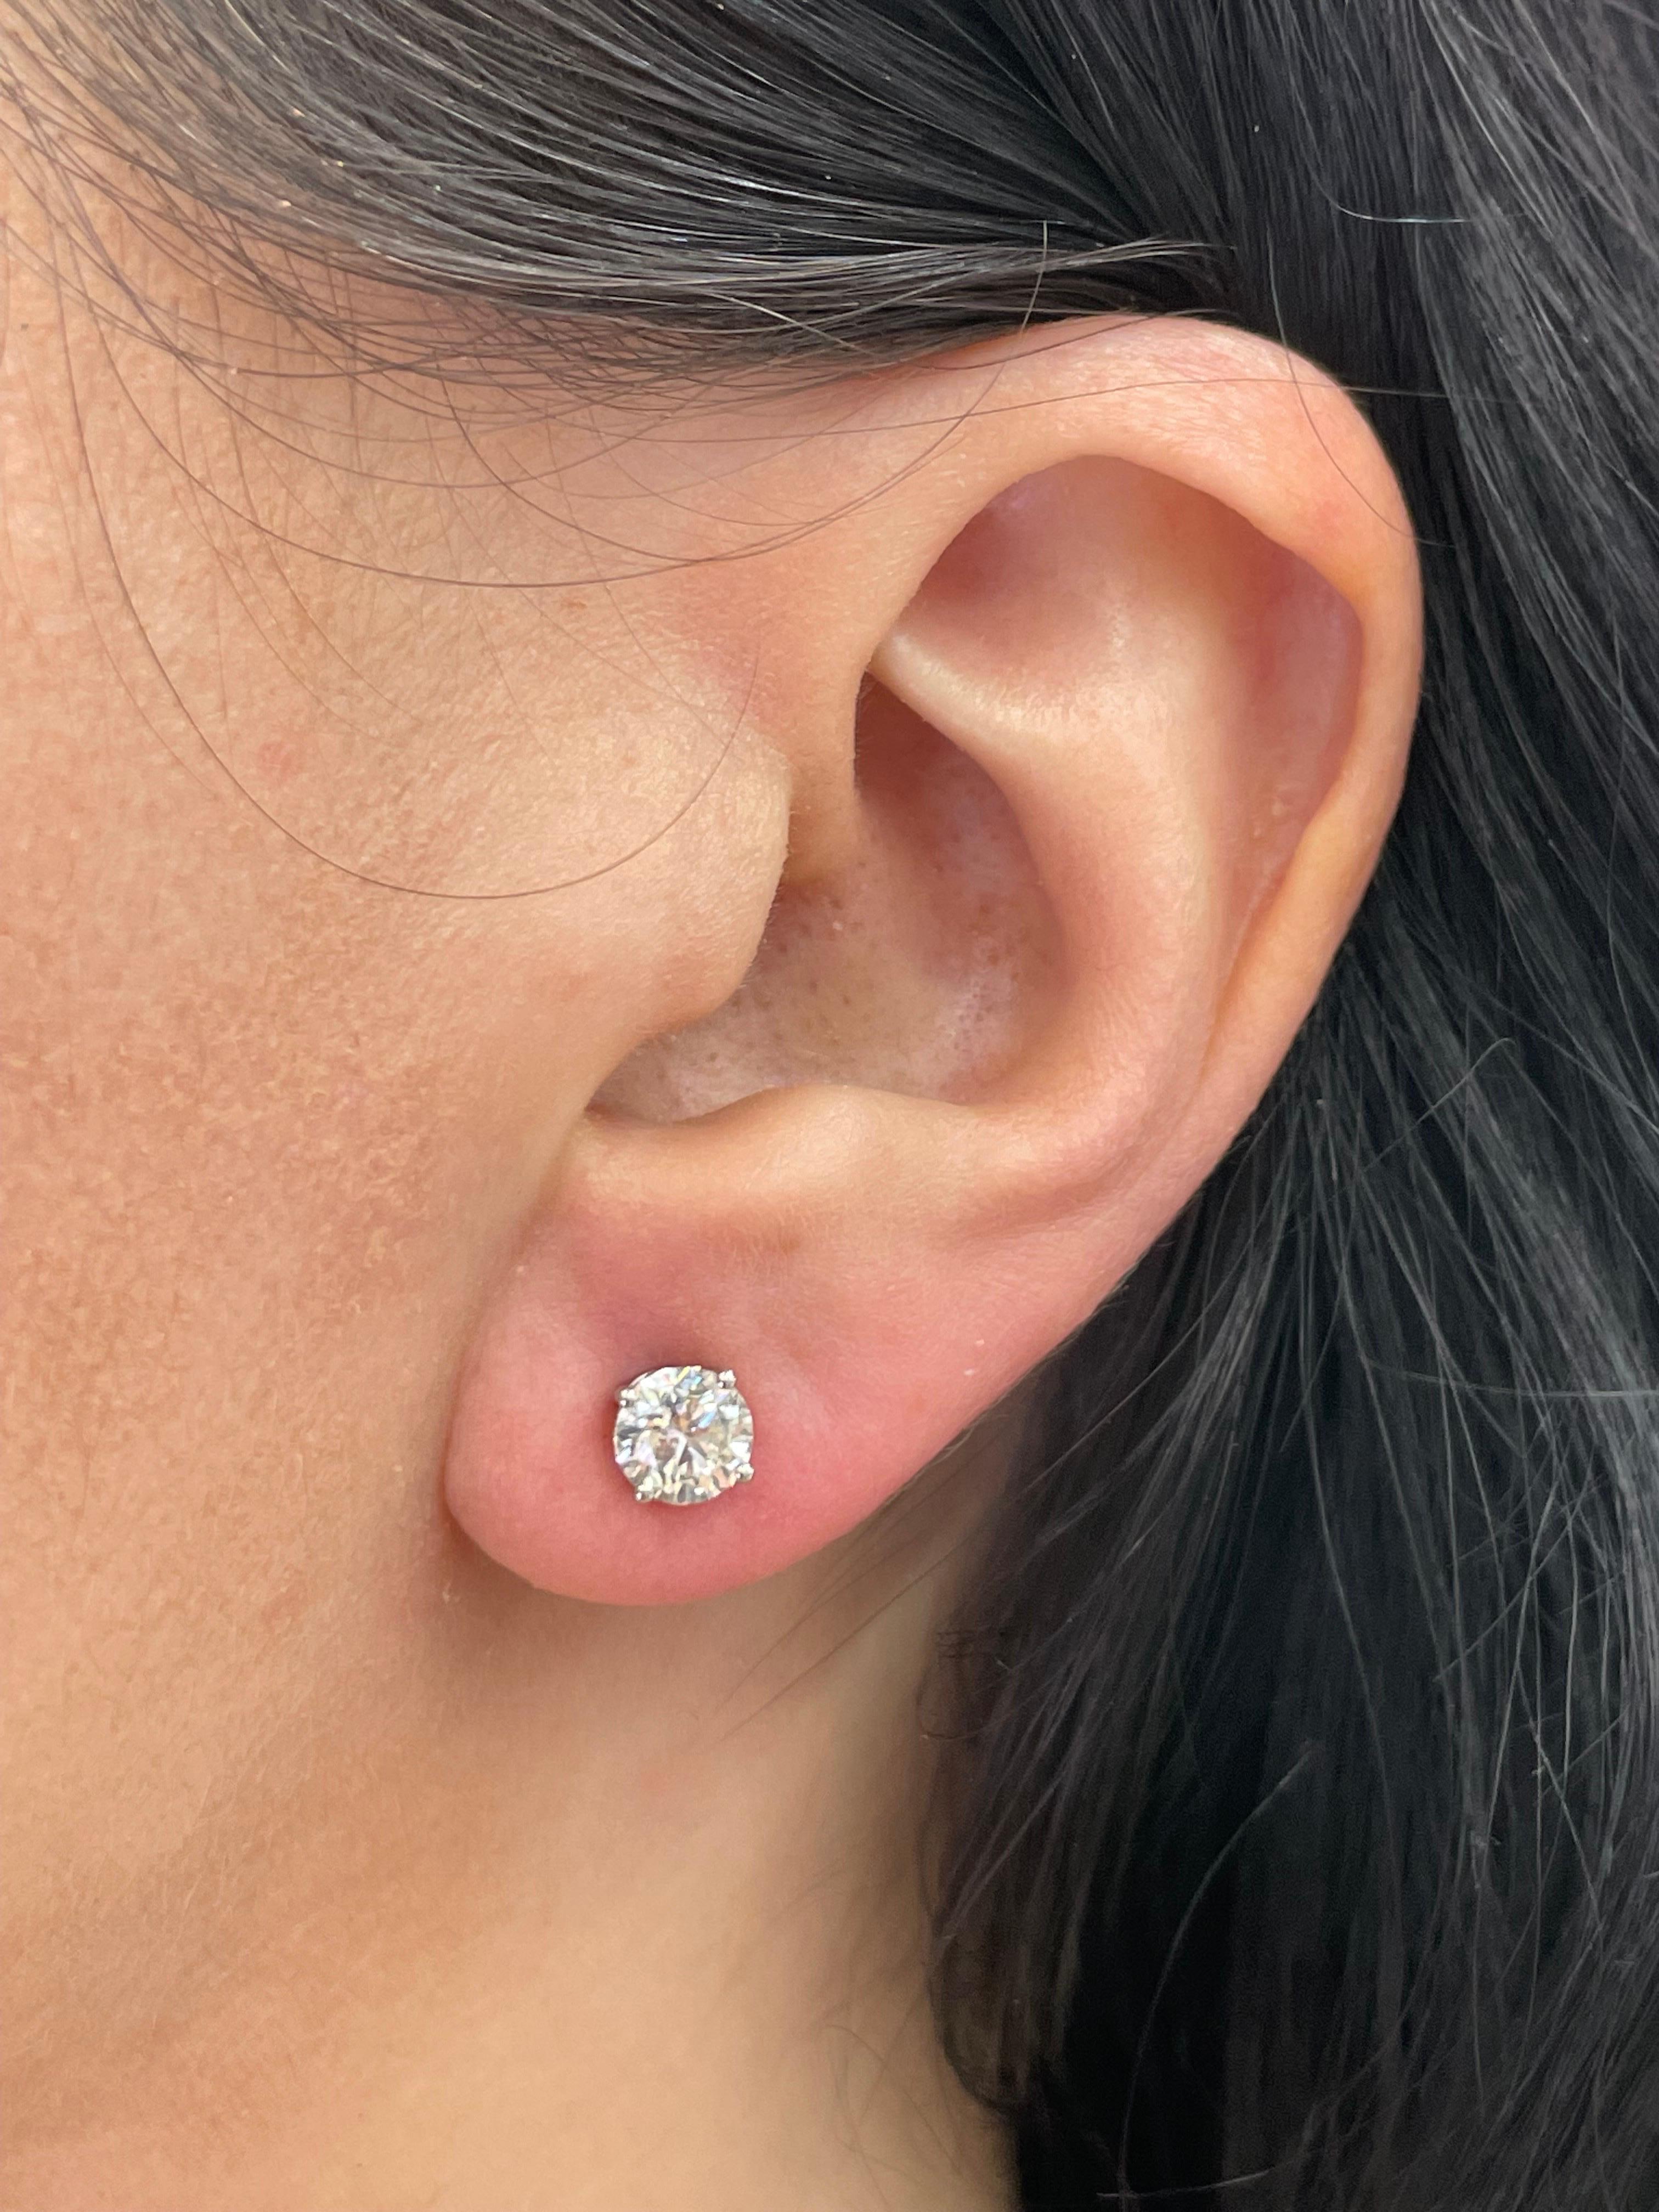 Diamond stud earrings weighing 1.60 Carats, Color L, Clarity SI1-SI2, in 14 Karat White Gold 4 prong Basket setting. 
Faces up as an I Color, Nice Life to Stones
Setting can be changed to a Basket, Martini or Champagne/ 3 or 4 Prong/ 14 or 18